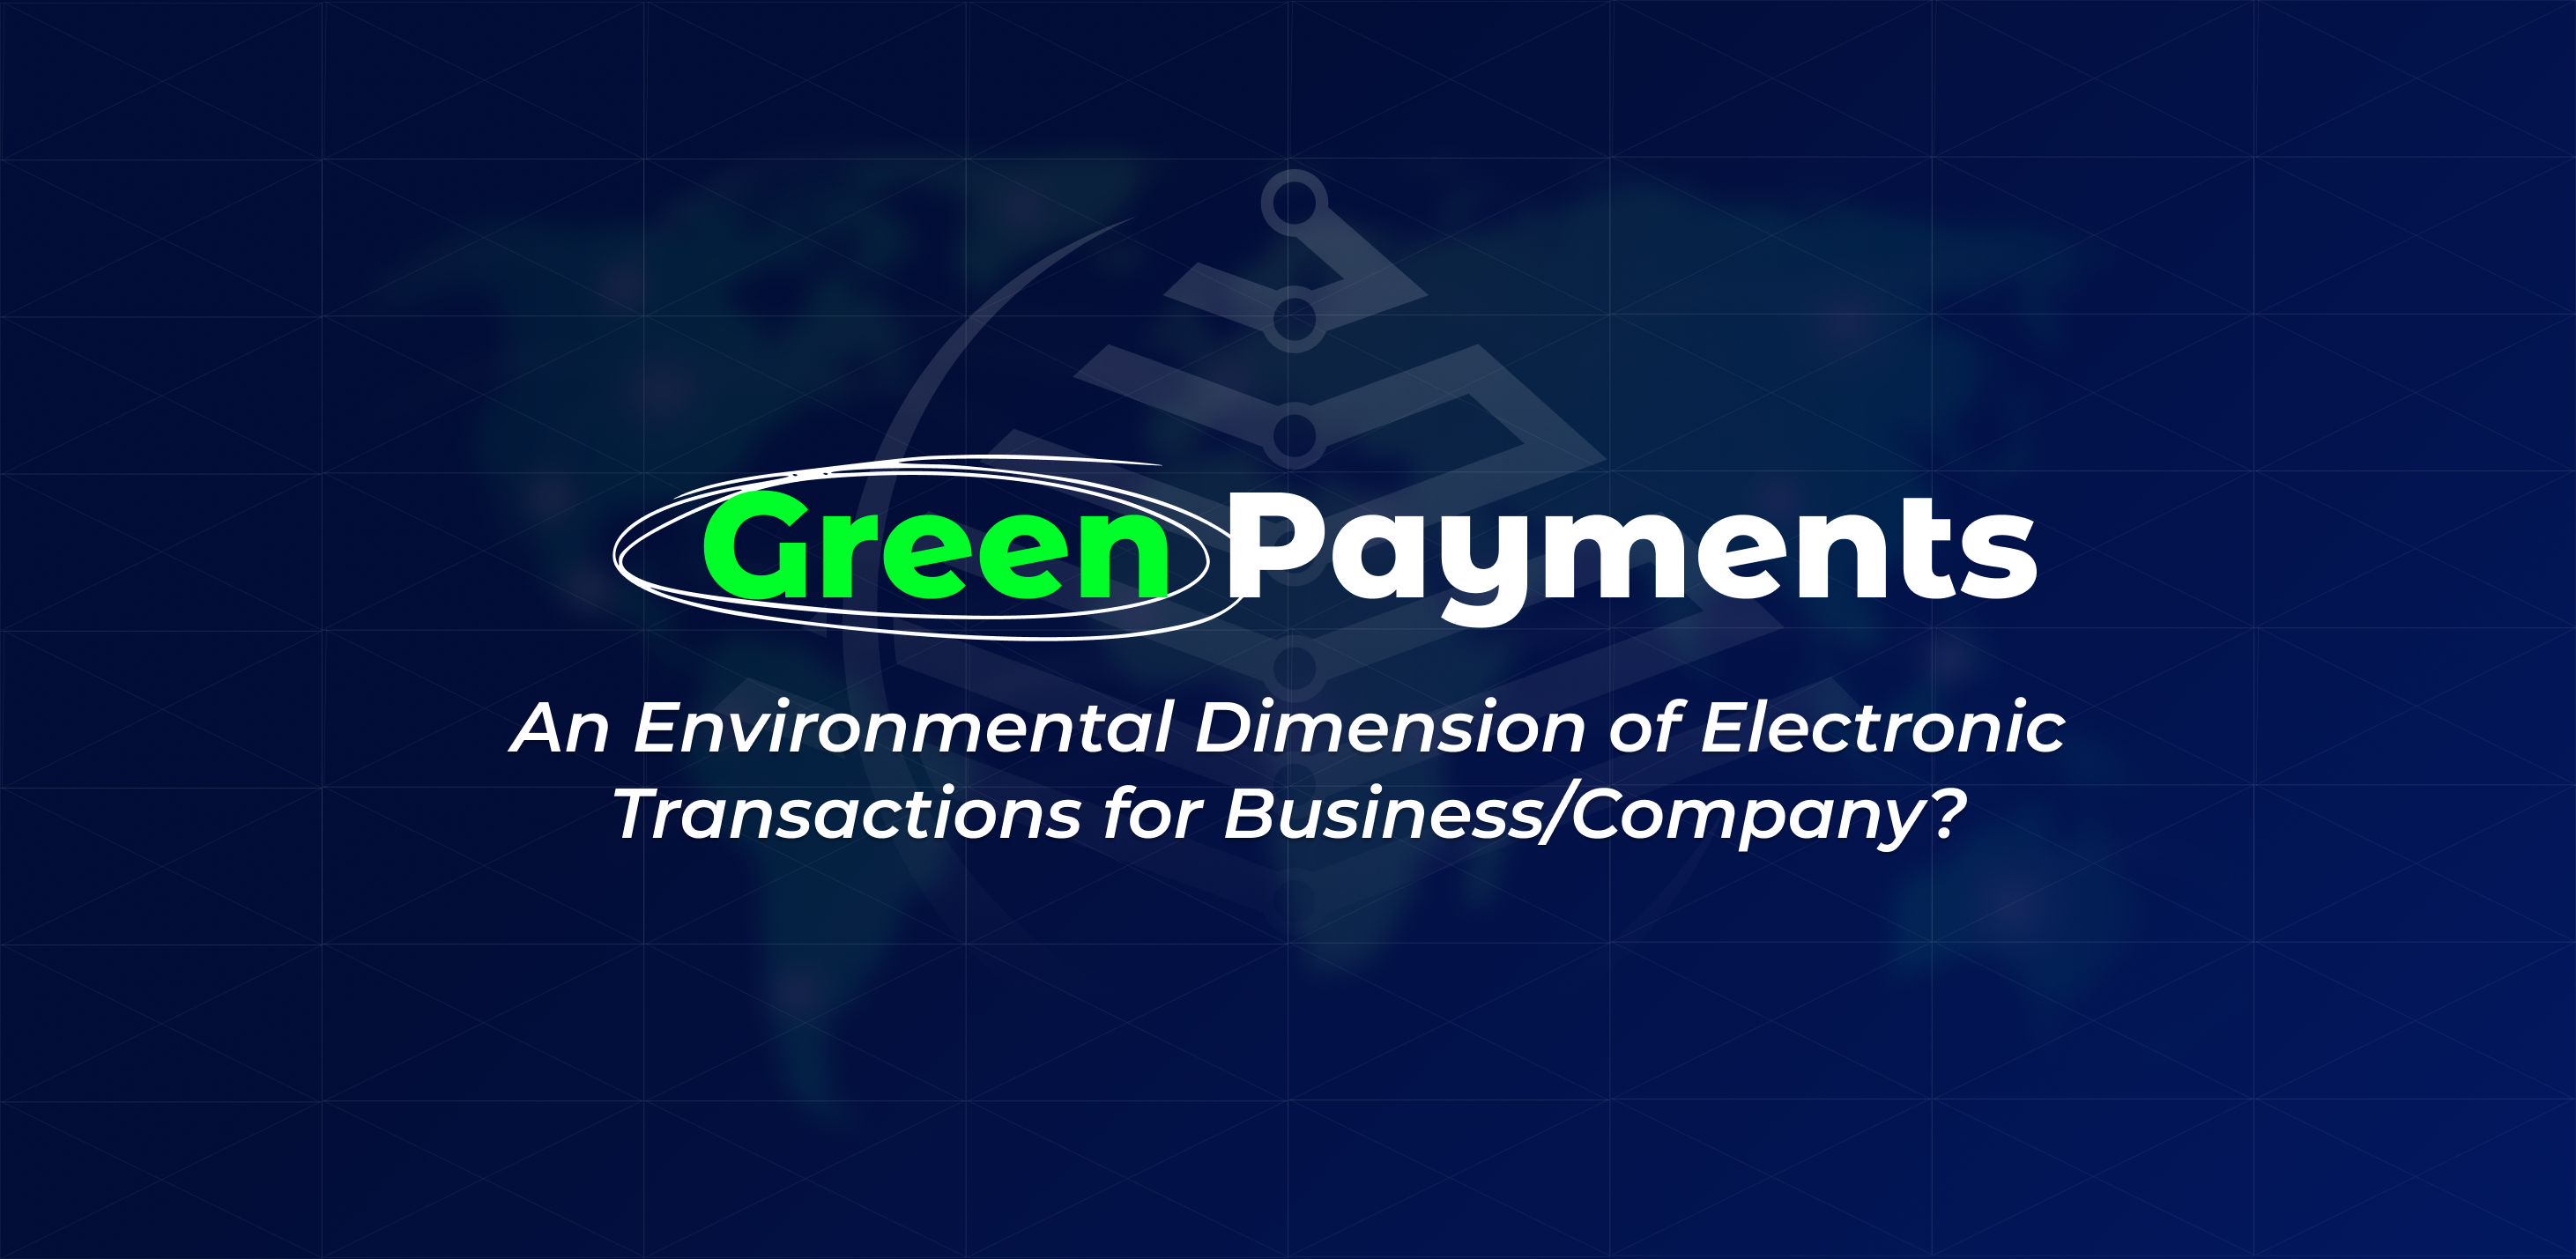 Green payments: environmental dimension of electronic transactions for a business/company